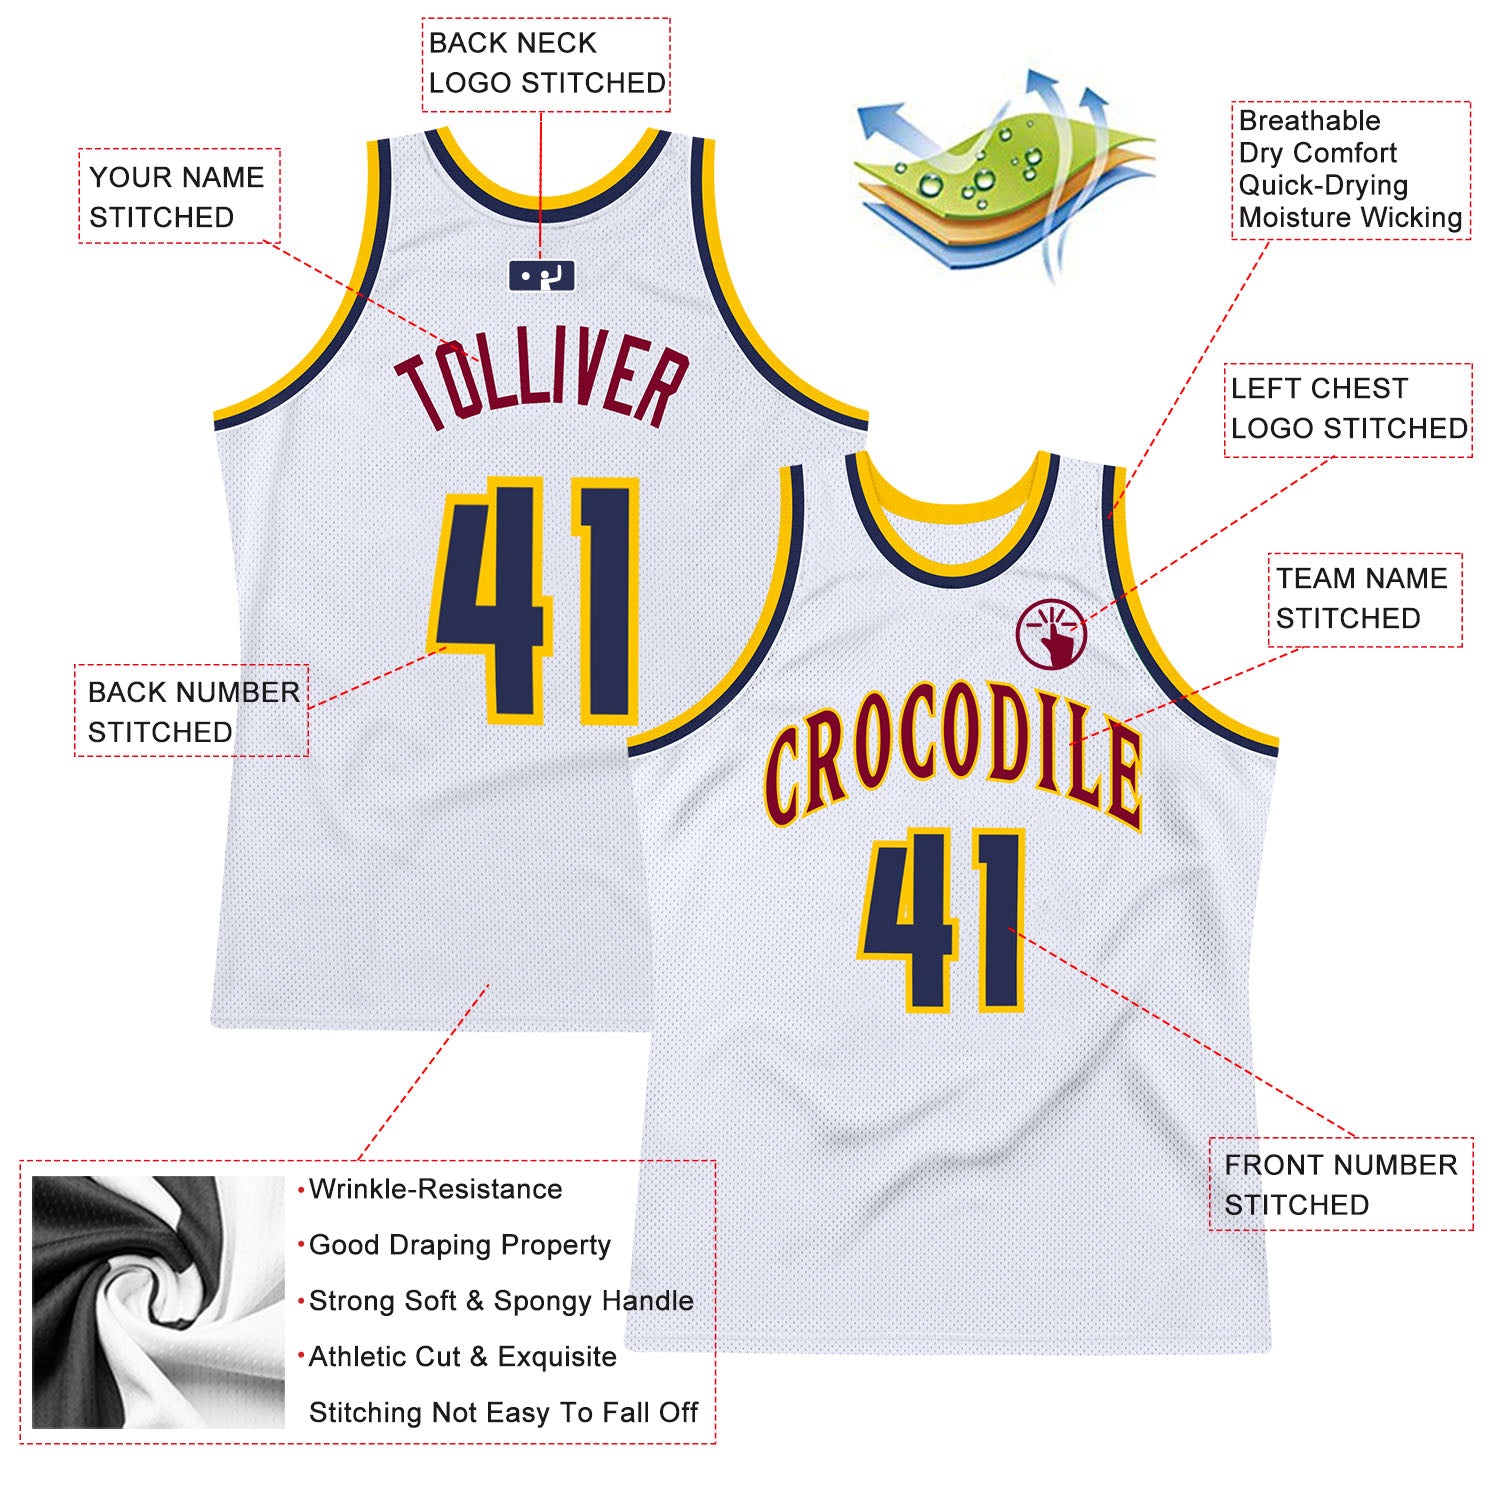 Custom White Navy-Gold Authentic Throwback Basketball Jersey